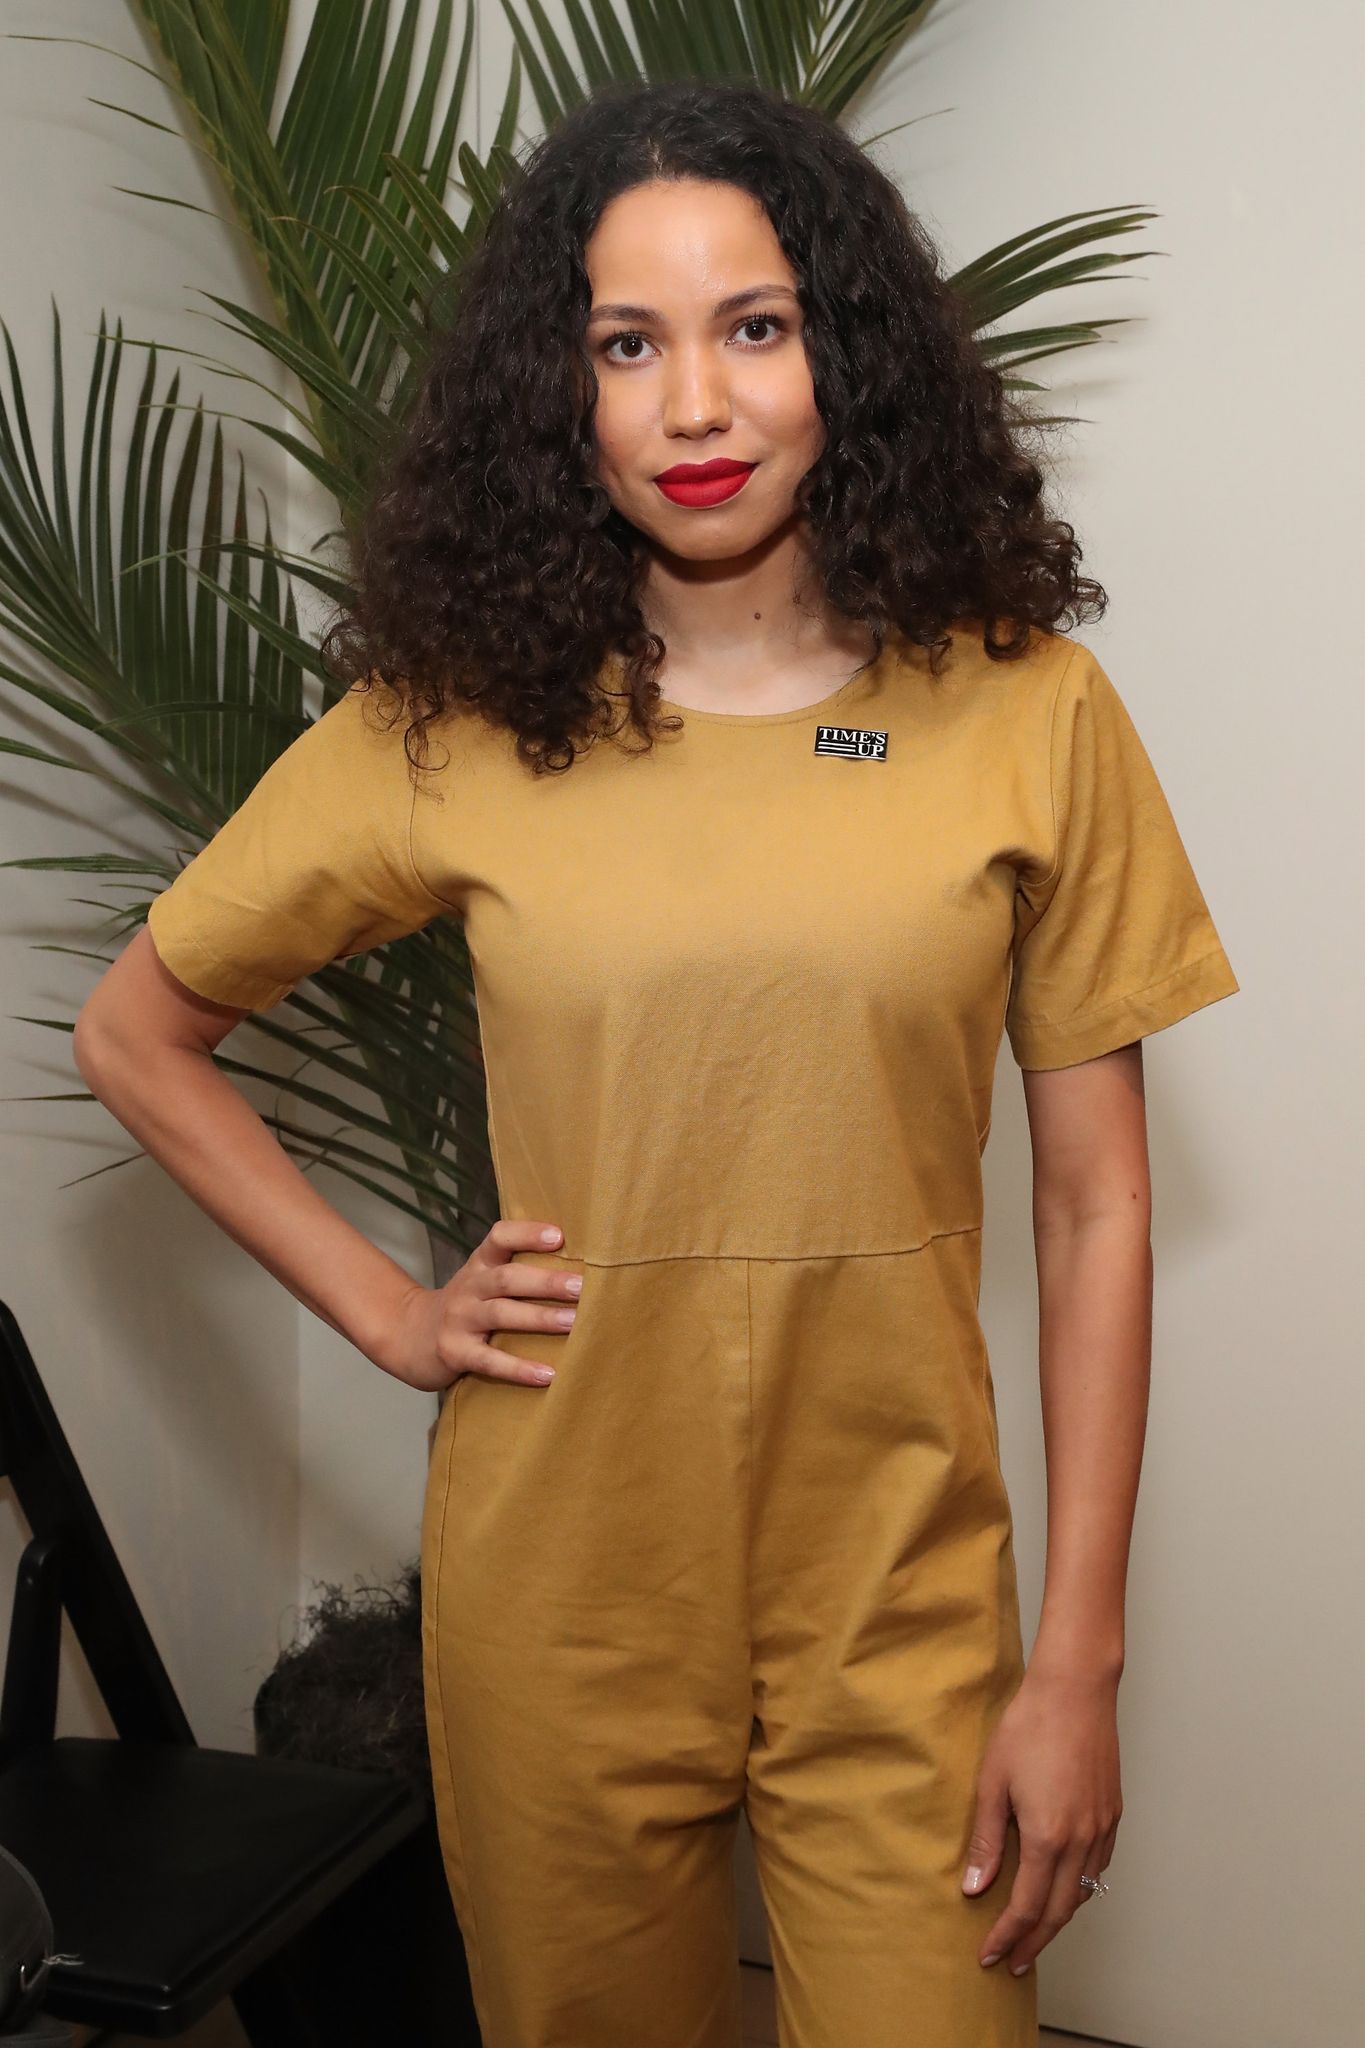 Jurnee Smollett at "Time's Up" at the Tribeca Film Festival on April 28, 2018 in New York. | Photo: Getty Images